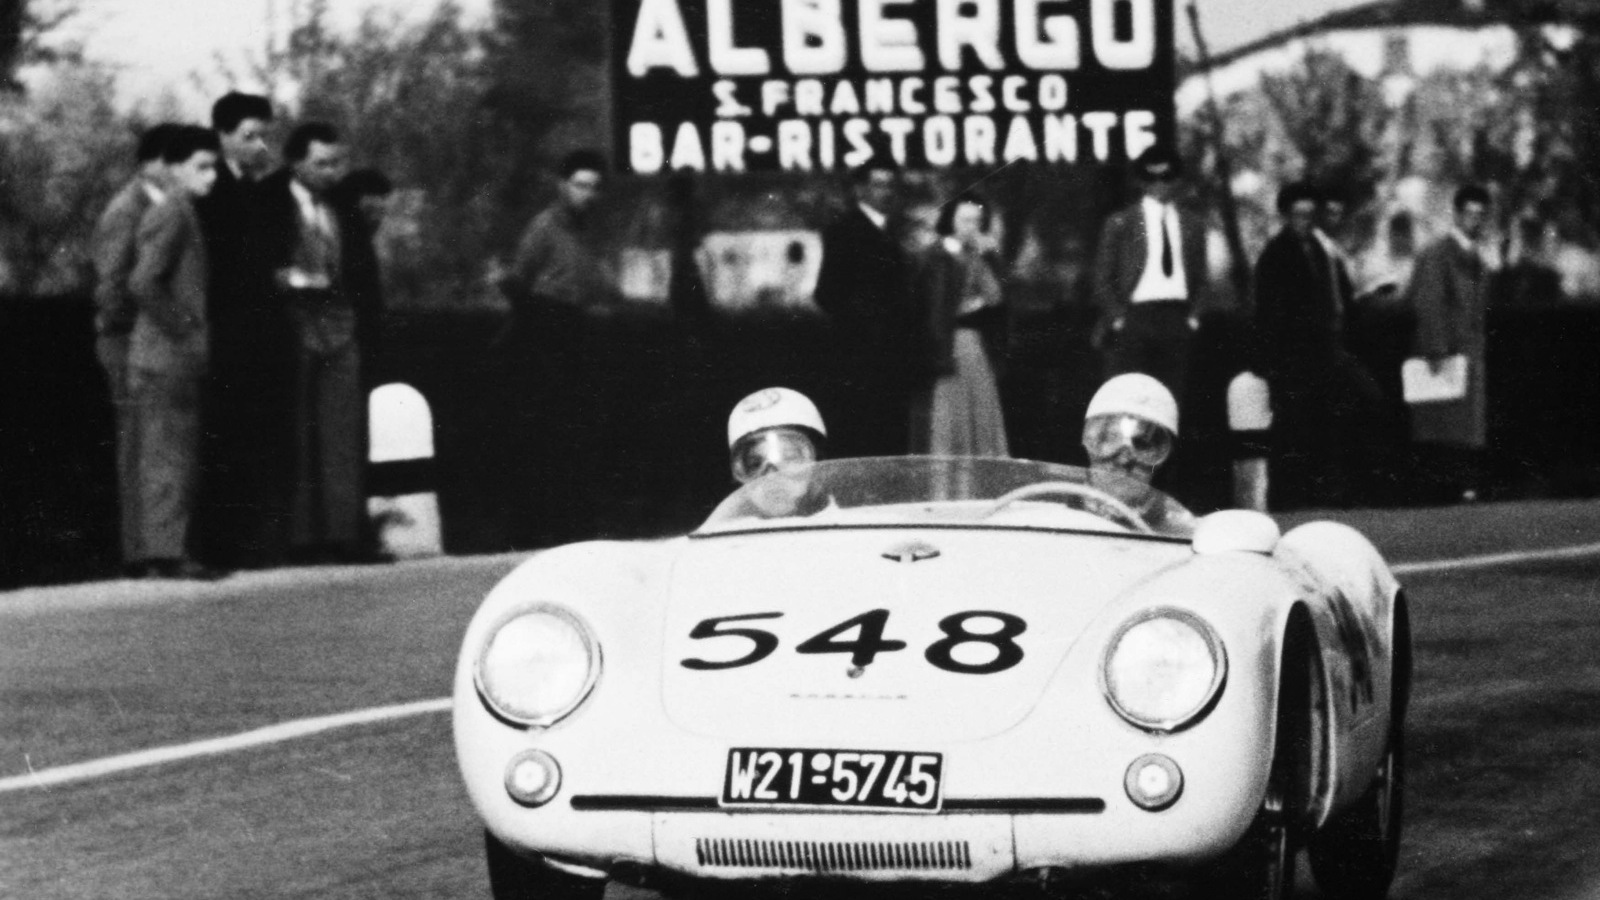 Classic Porsches from Mille Miglia history.